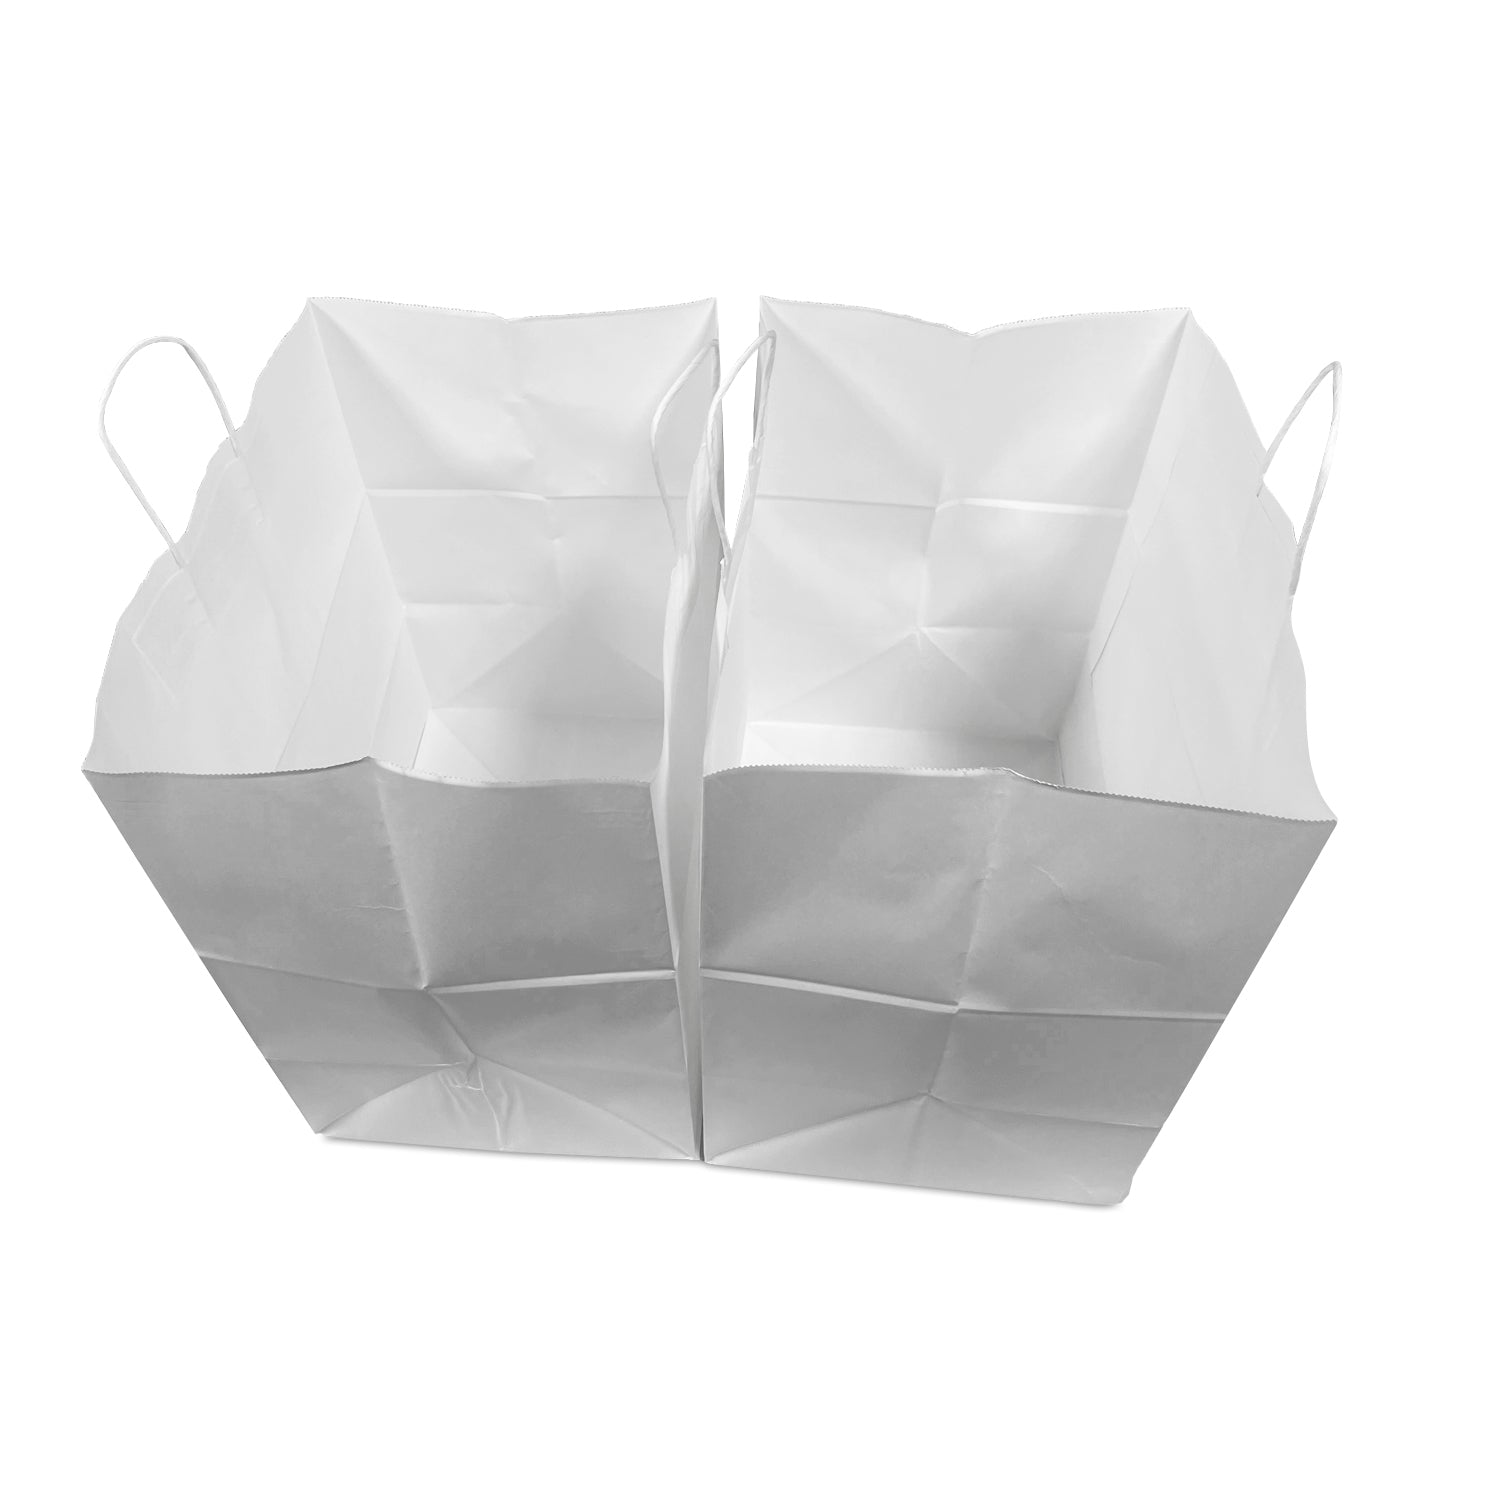 200 Pcs, Dumbo,  15x10.5x16.5 inches, White Paper Bags, with Twisted Handle